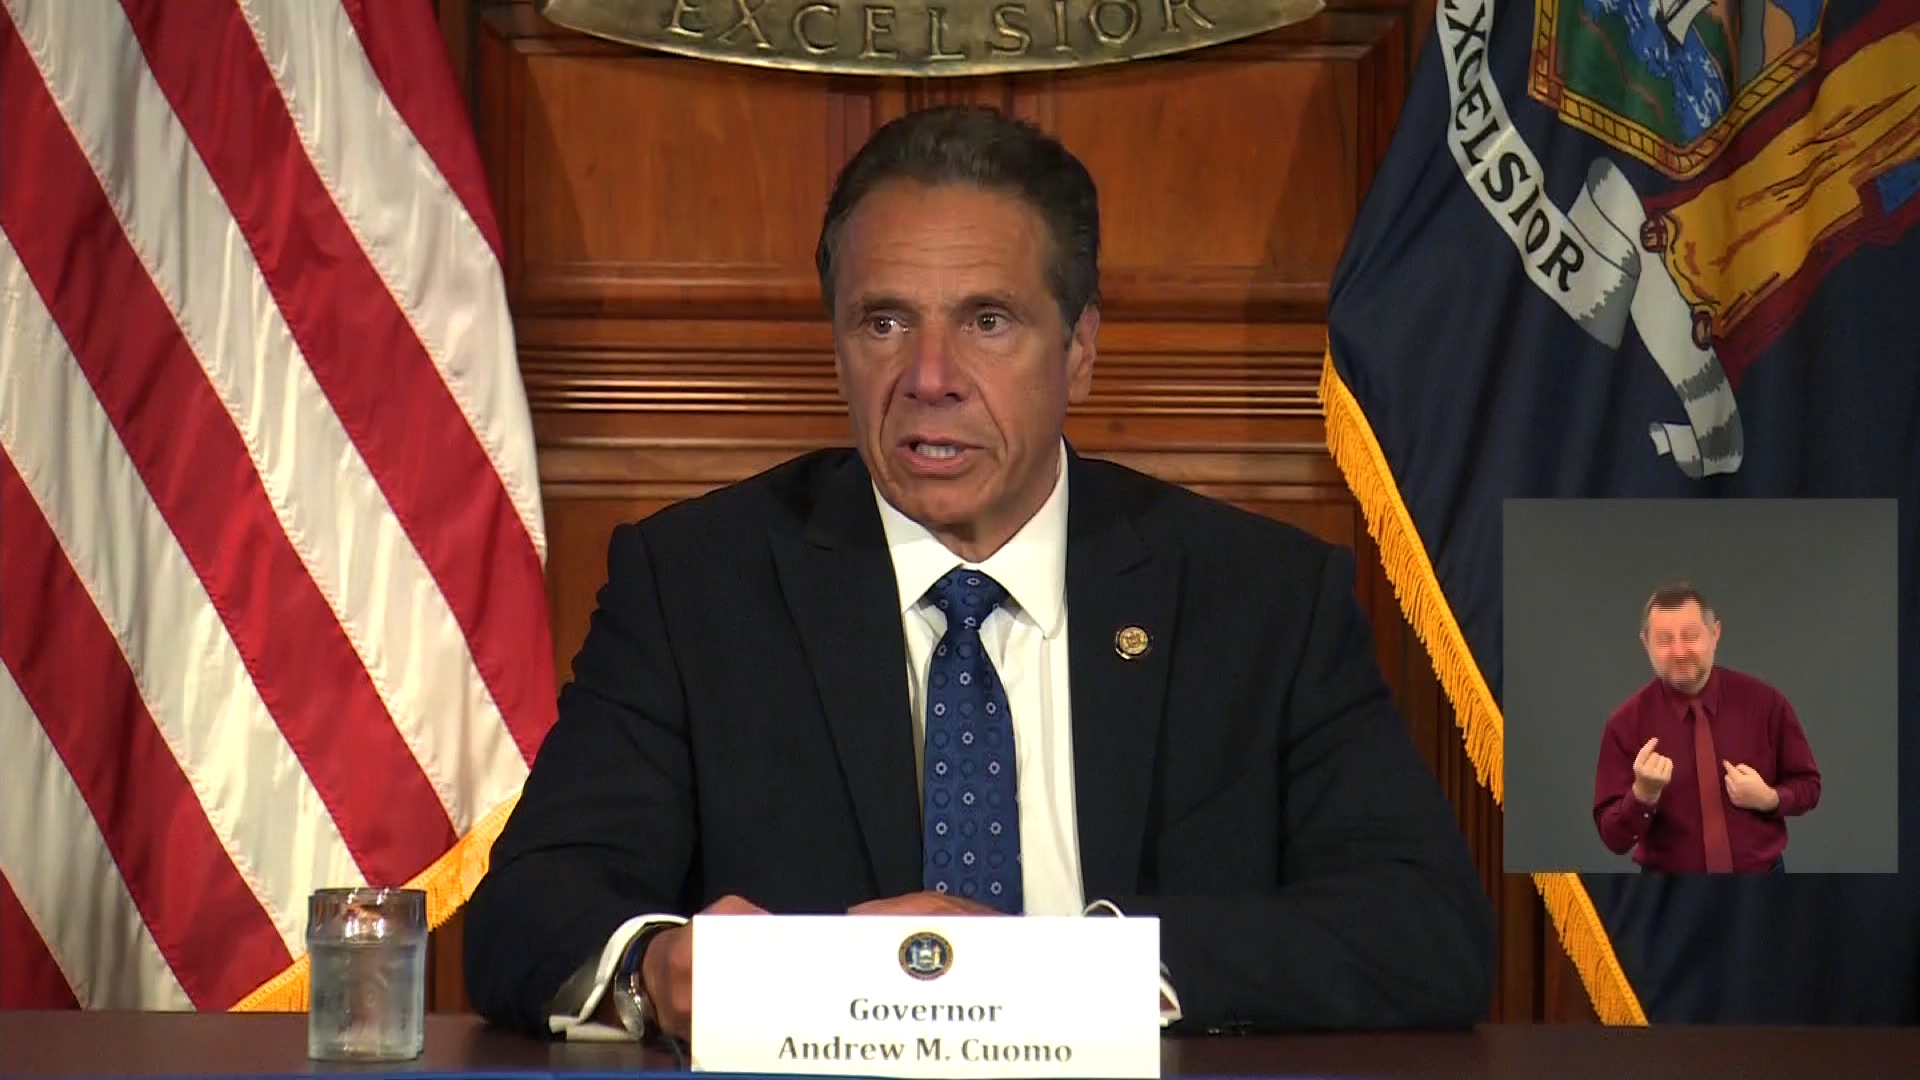 Gov. Cuomo speaks at a daily news conference in Albany, New York, on June 4.